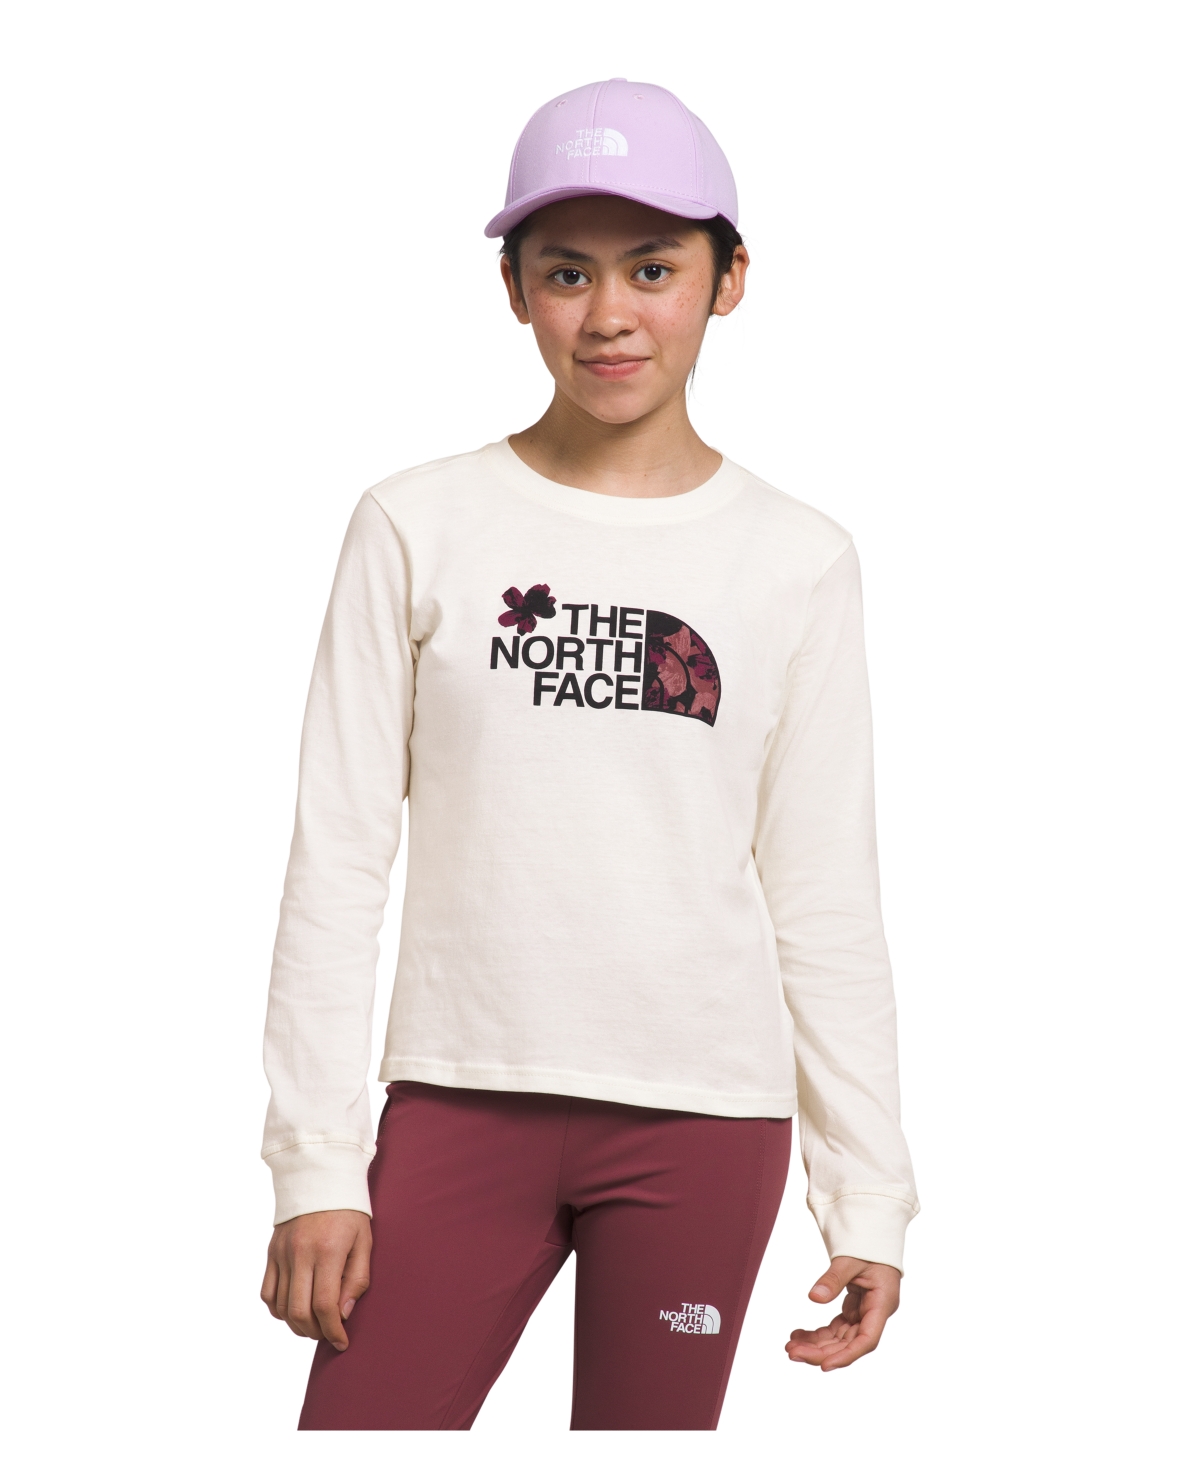 The North Face Kids' Big Girls Long Sleeve Graphic T-shirt In Gardenia White,boysenberry